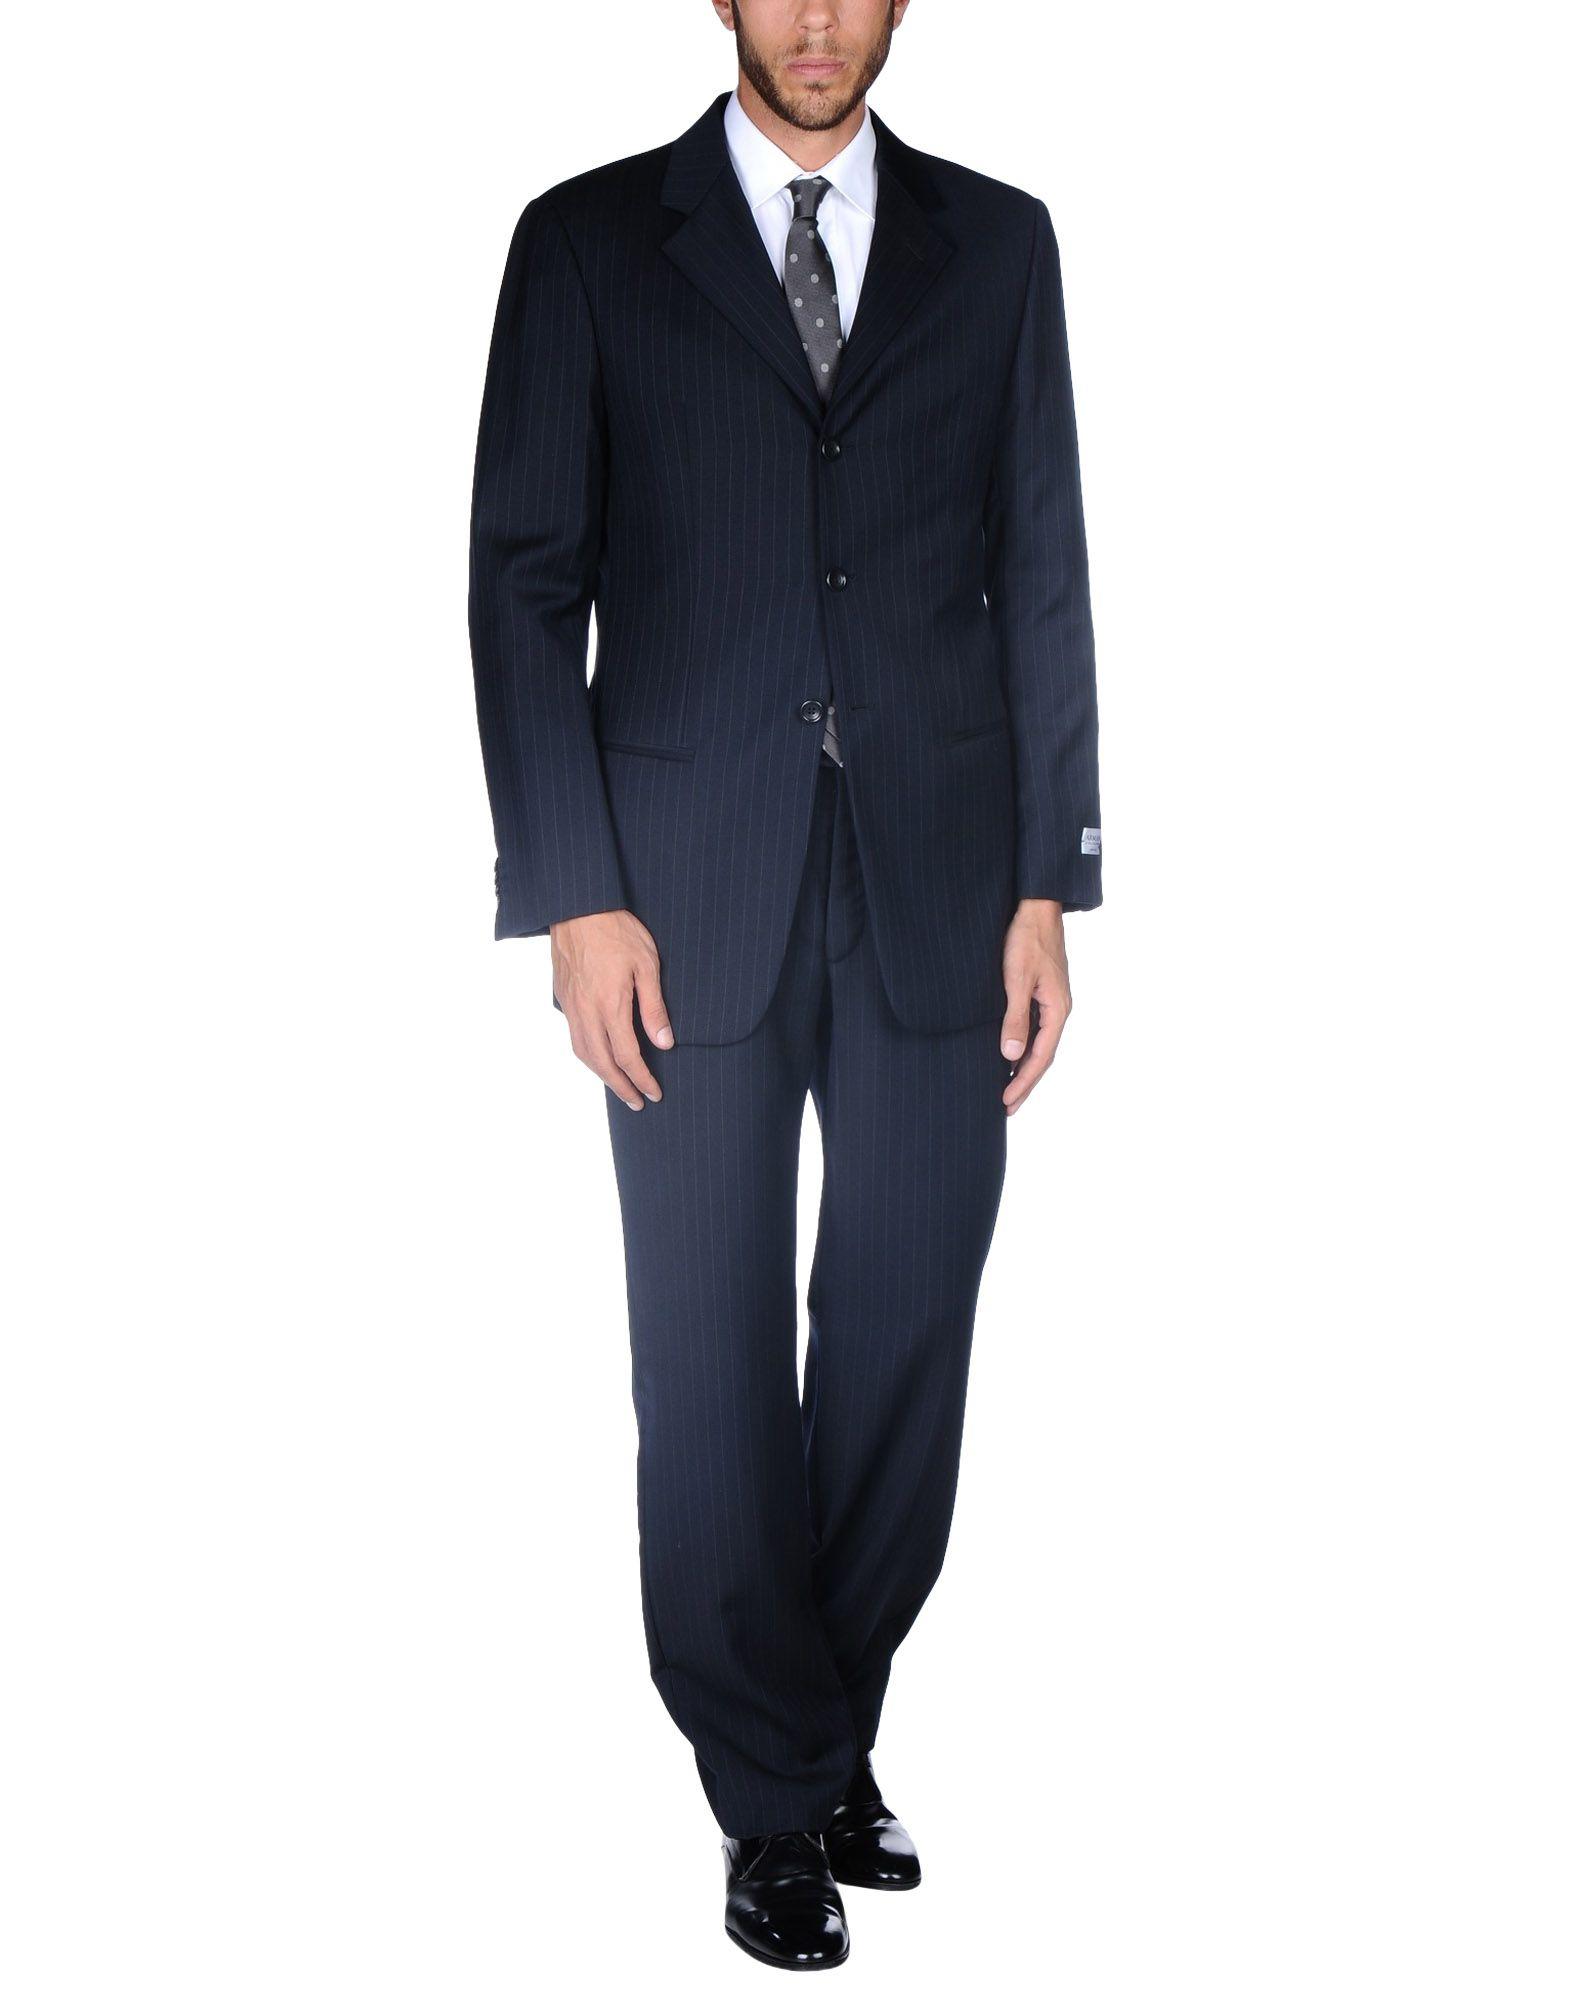 Armani Wool Suit in Dark Blue (Blue) for Men - Save 64% - Lyst